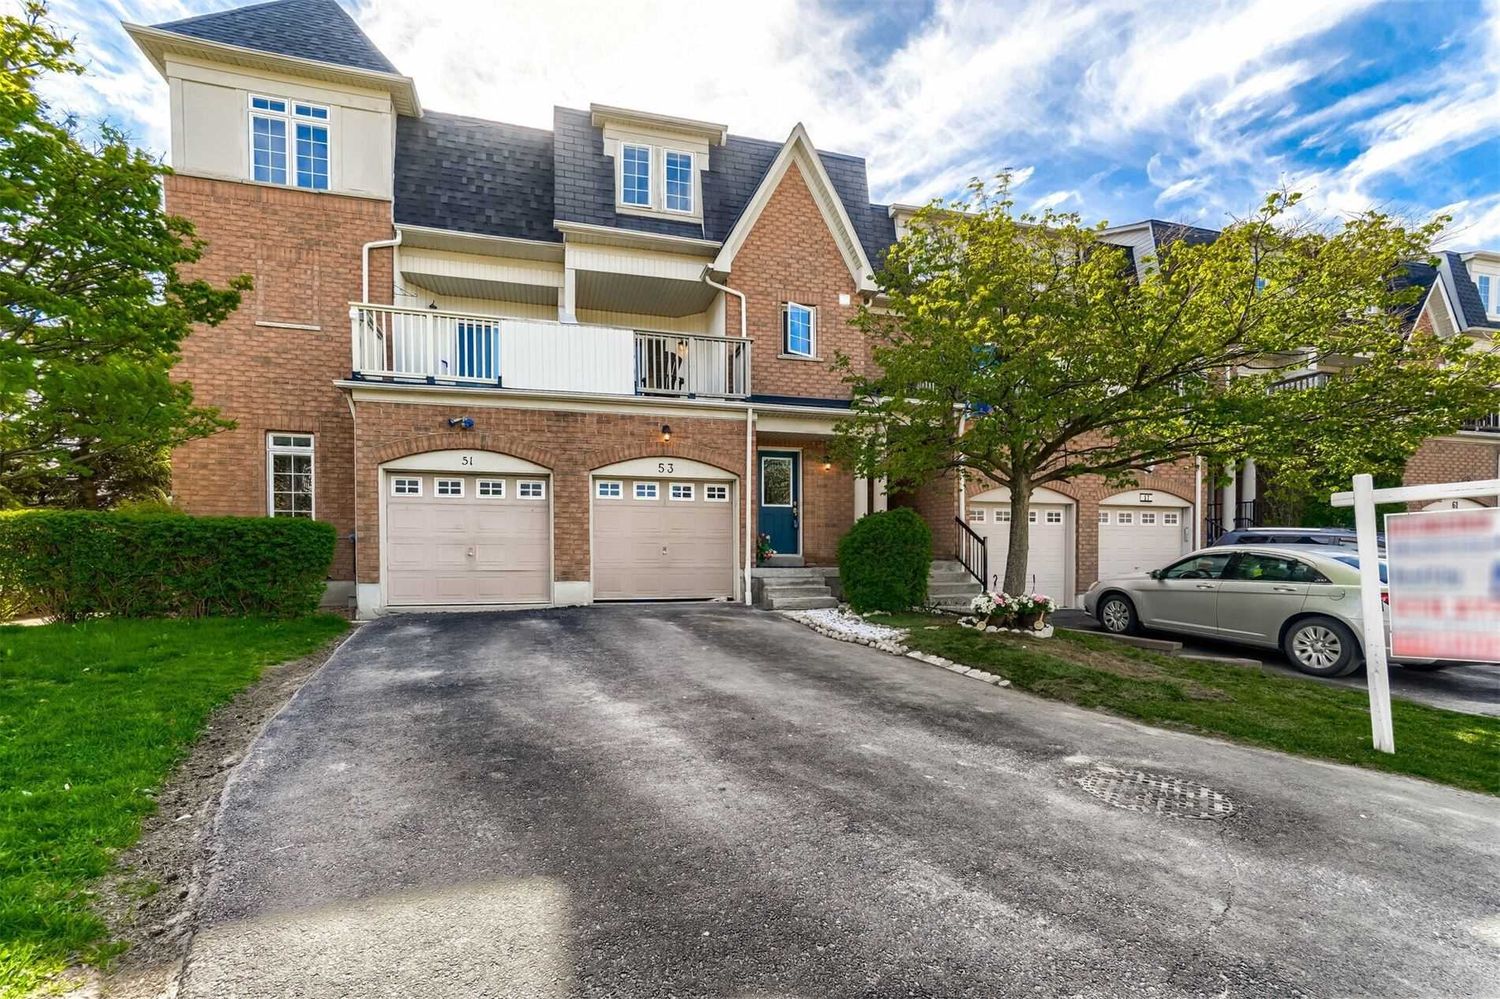 1-118 Sprucedale Way. Sprucedale & Palisades Townhomes is located in  Whitby, Toronto - image #2 of 2